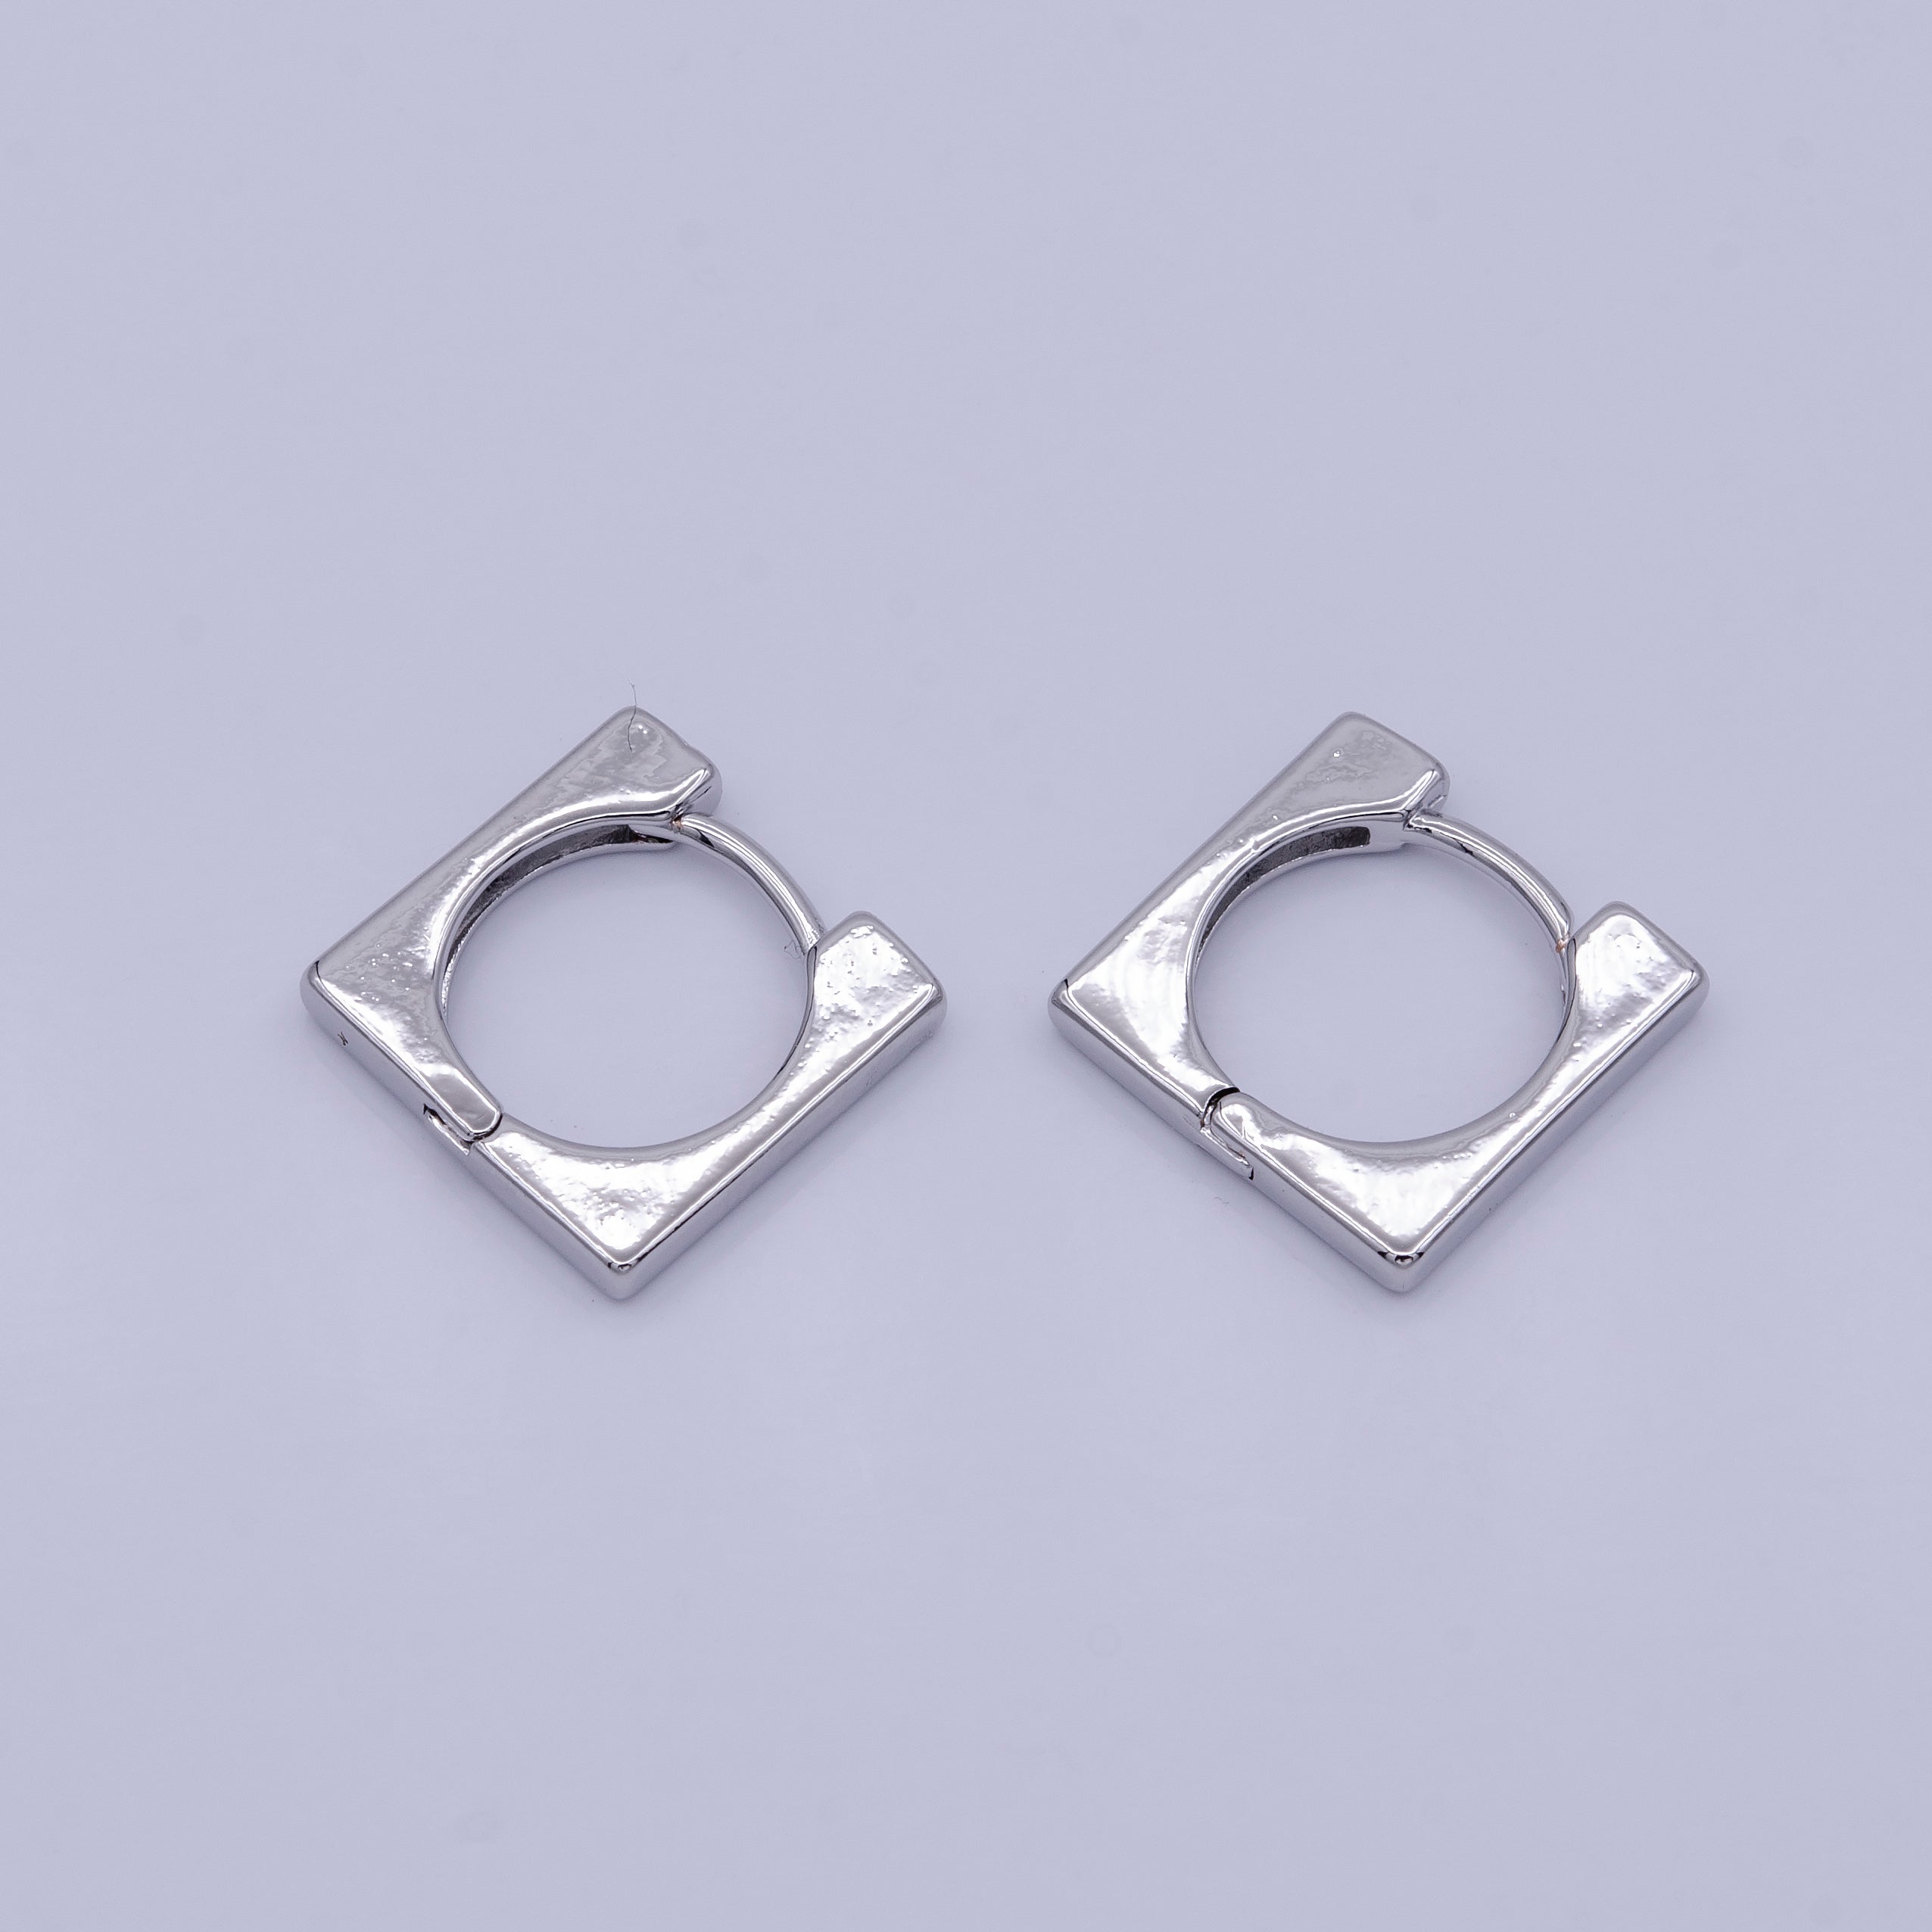 Gold, Silver 14mm Square Rounded Thin Huggie Earrings | AD875 AD876